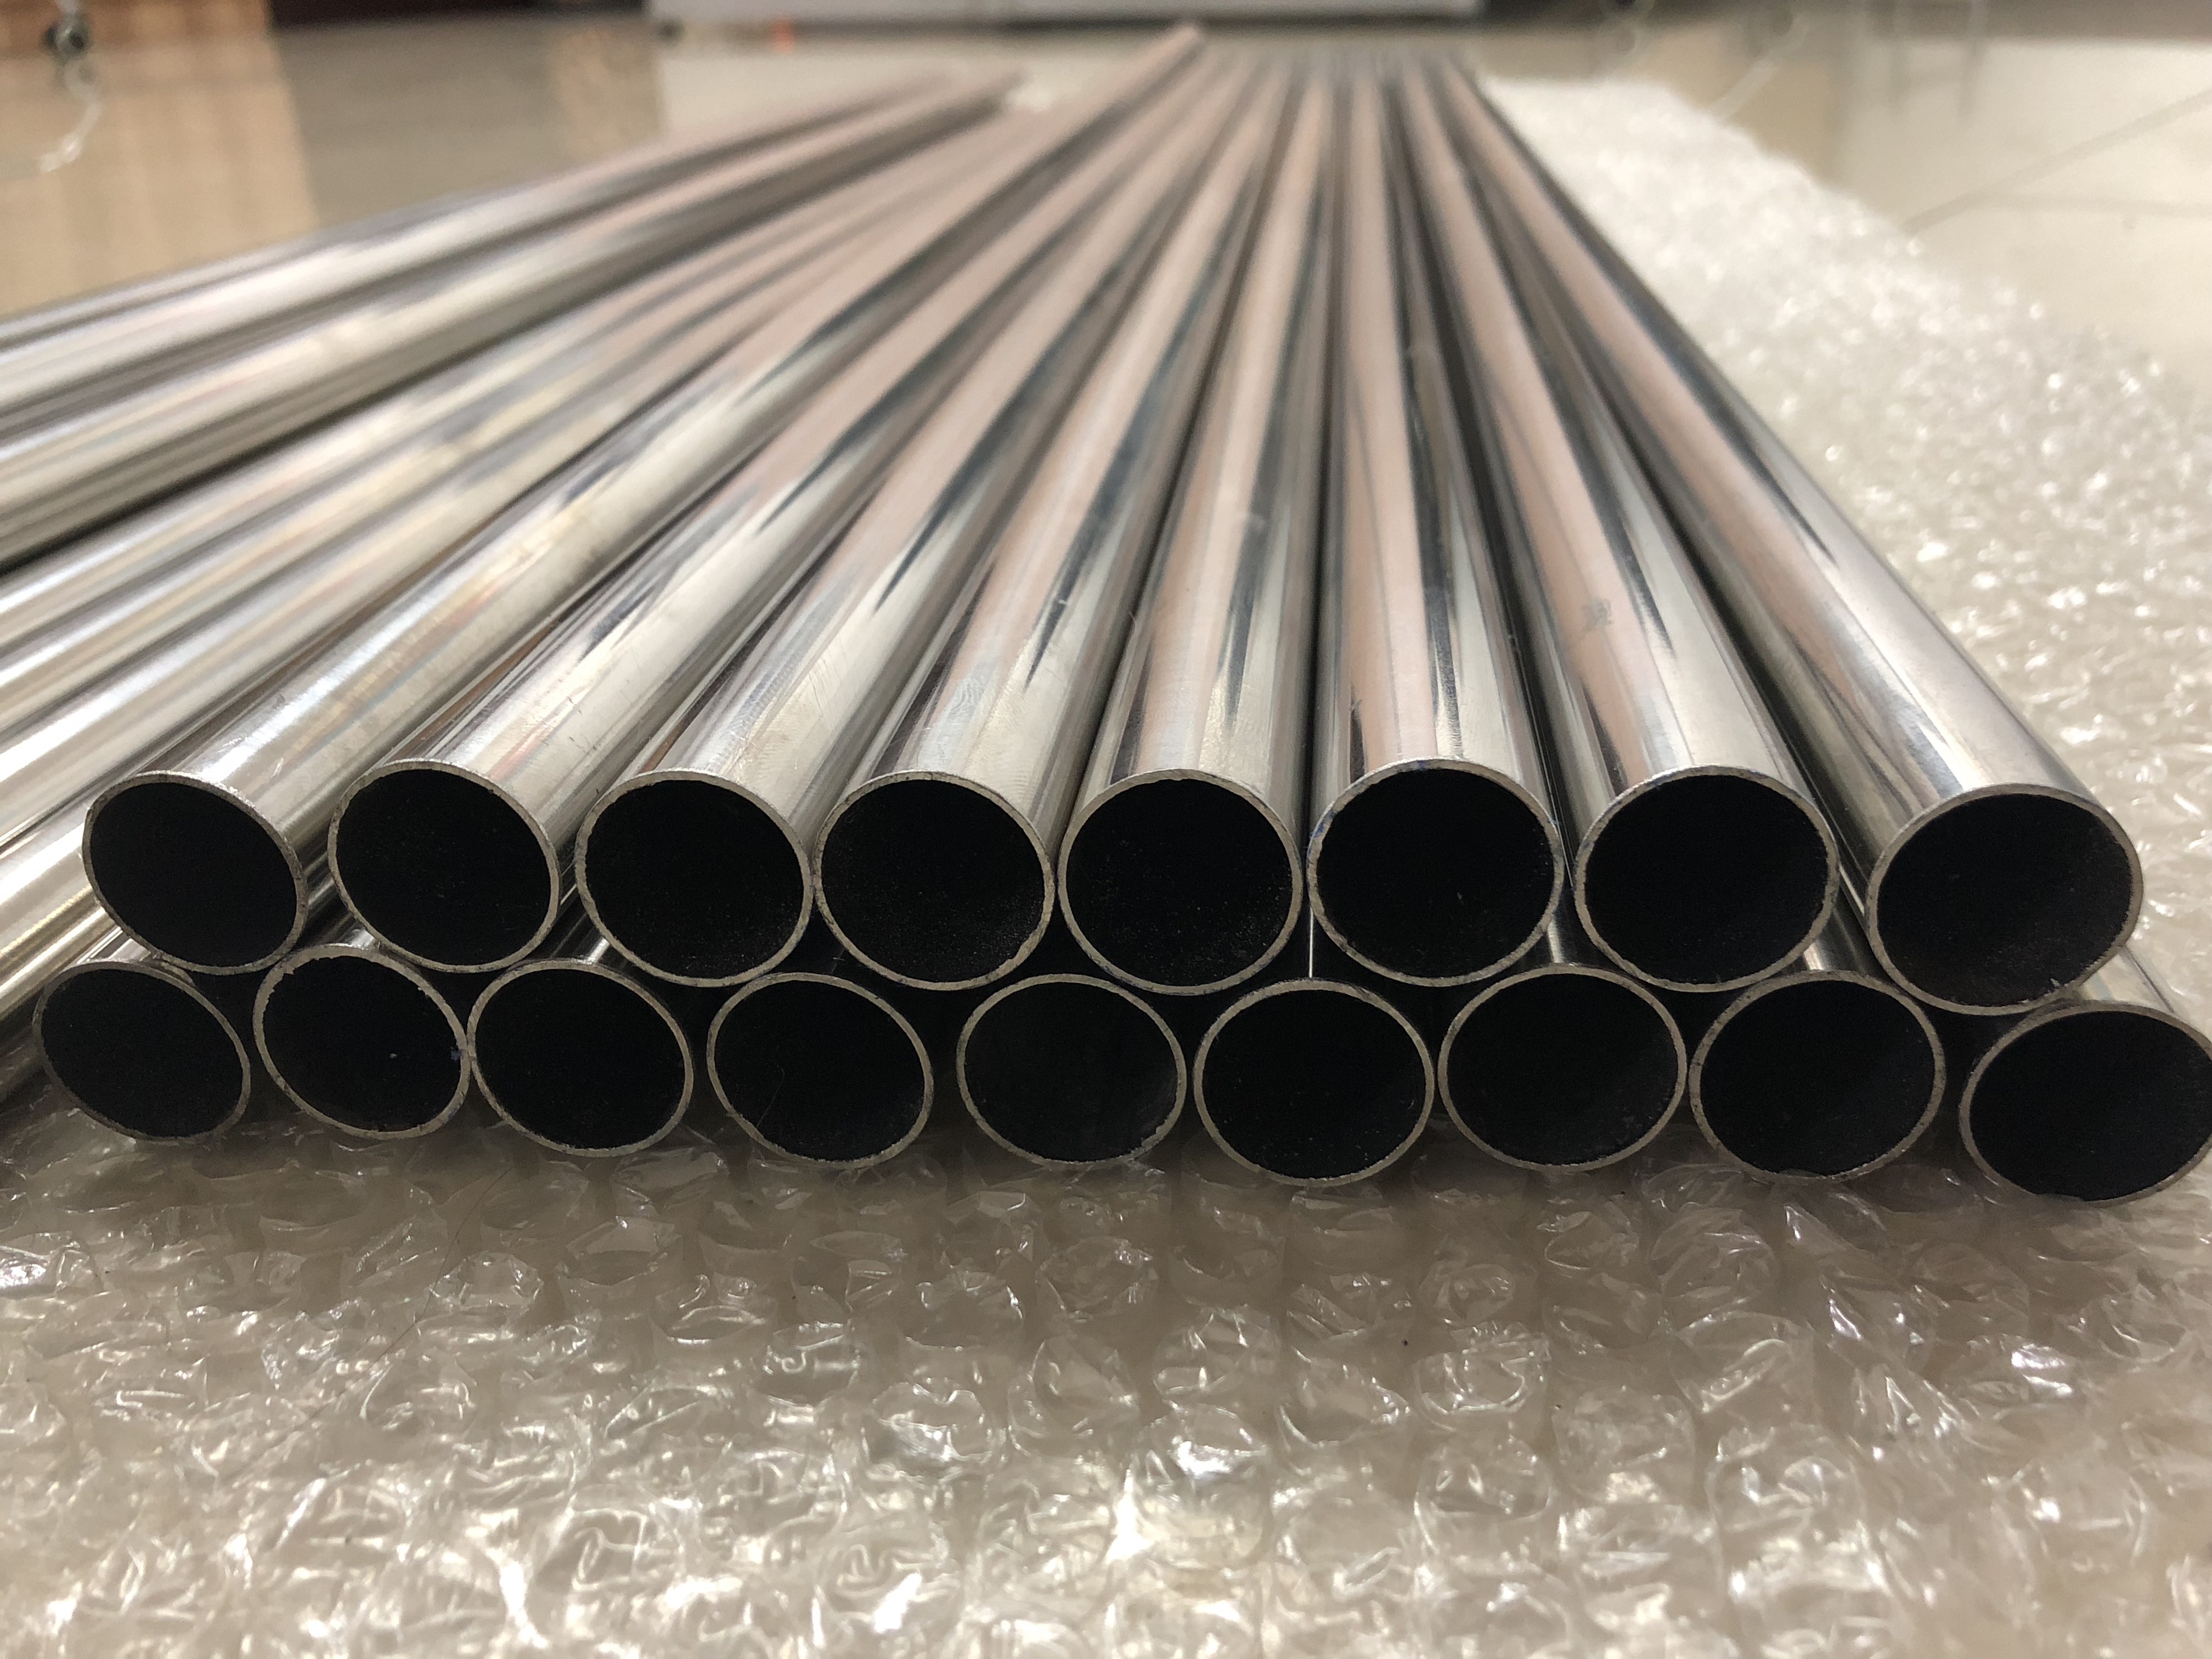 201 Stainless steel pipe